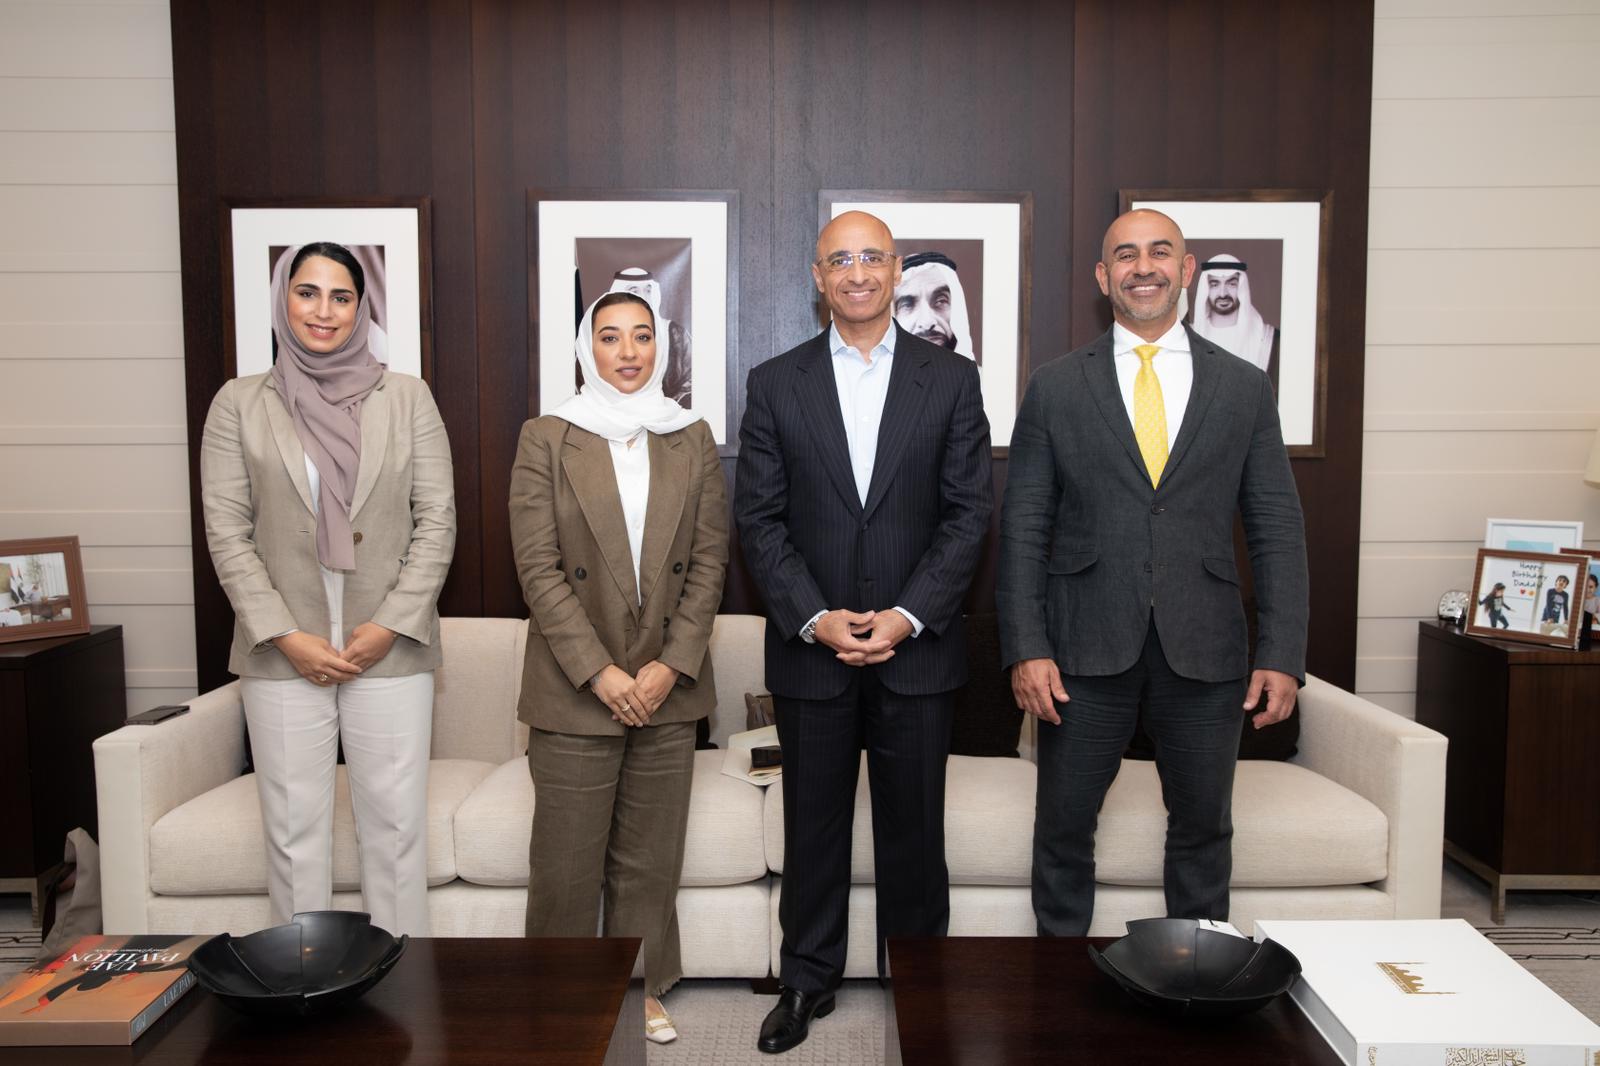 Yousef Al Otaiba stands with leaders of a UAE delegation while meeting at the UAE Embassy in Washington, D.C.